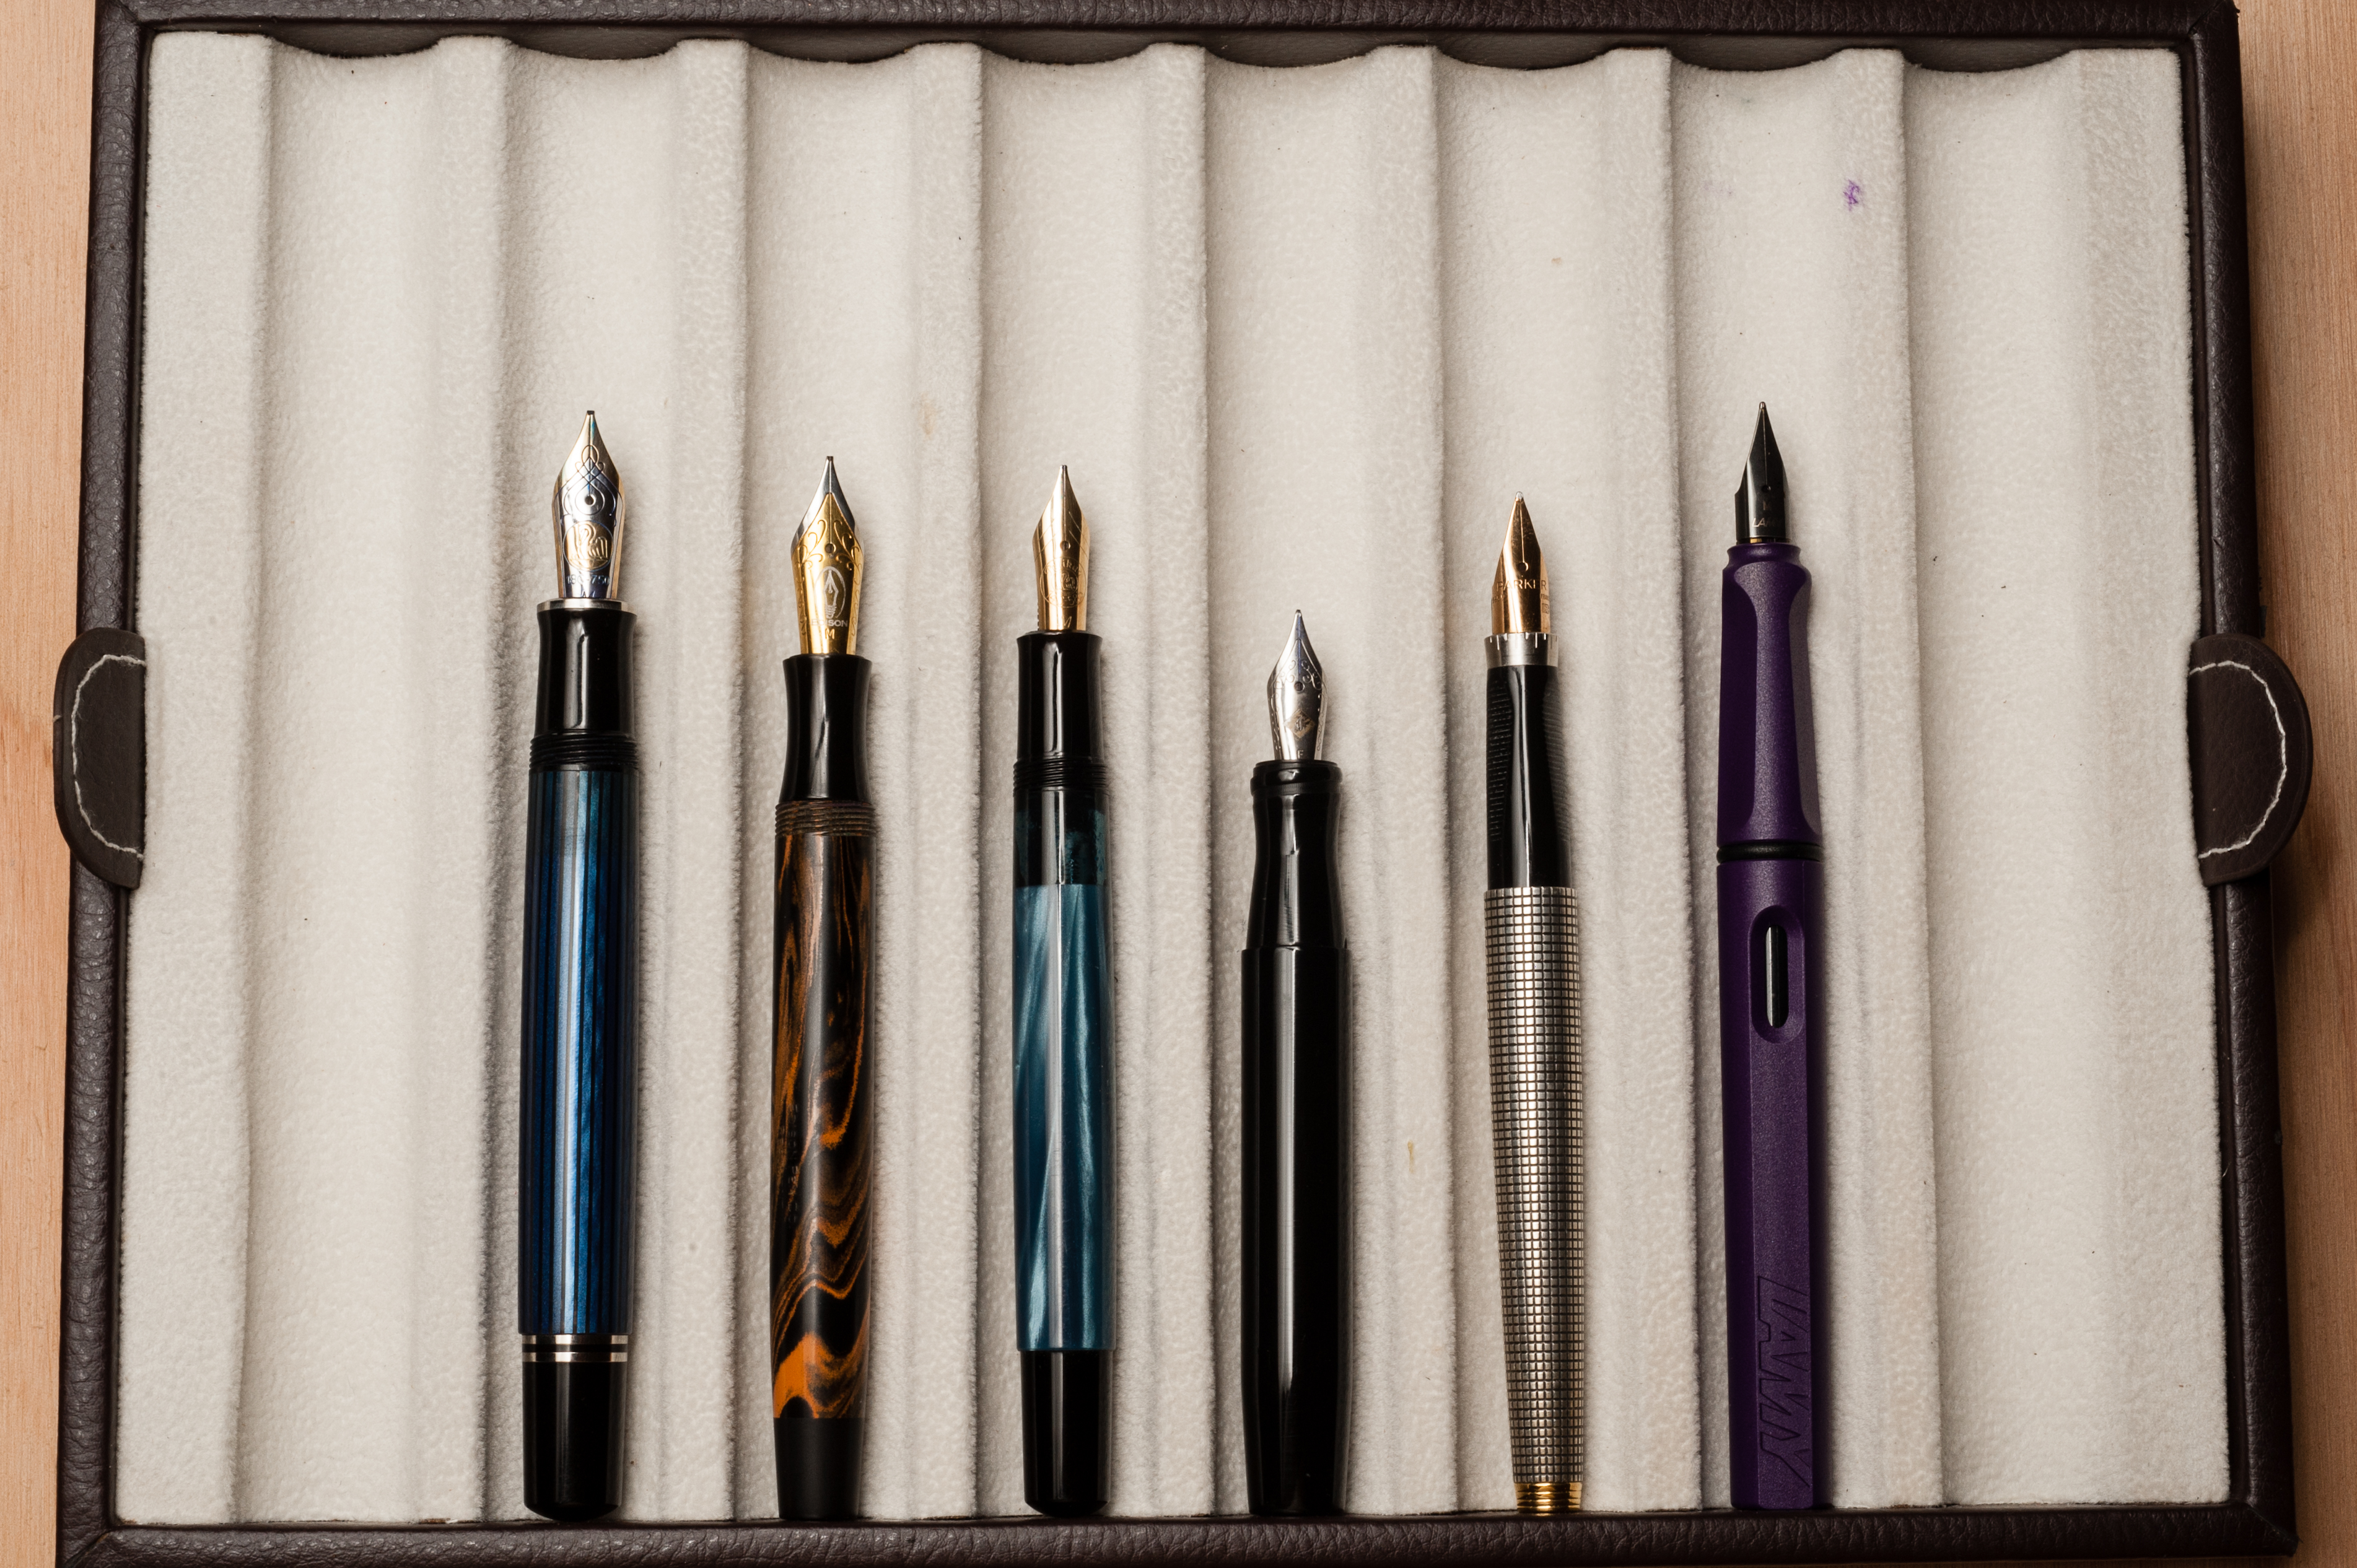 Unposted from left to right: Pelikan M805, Edison Beaumont, Pelikan M200, Franklin-Christoph Model 45, Parker 75, and Lamy Safari